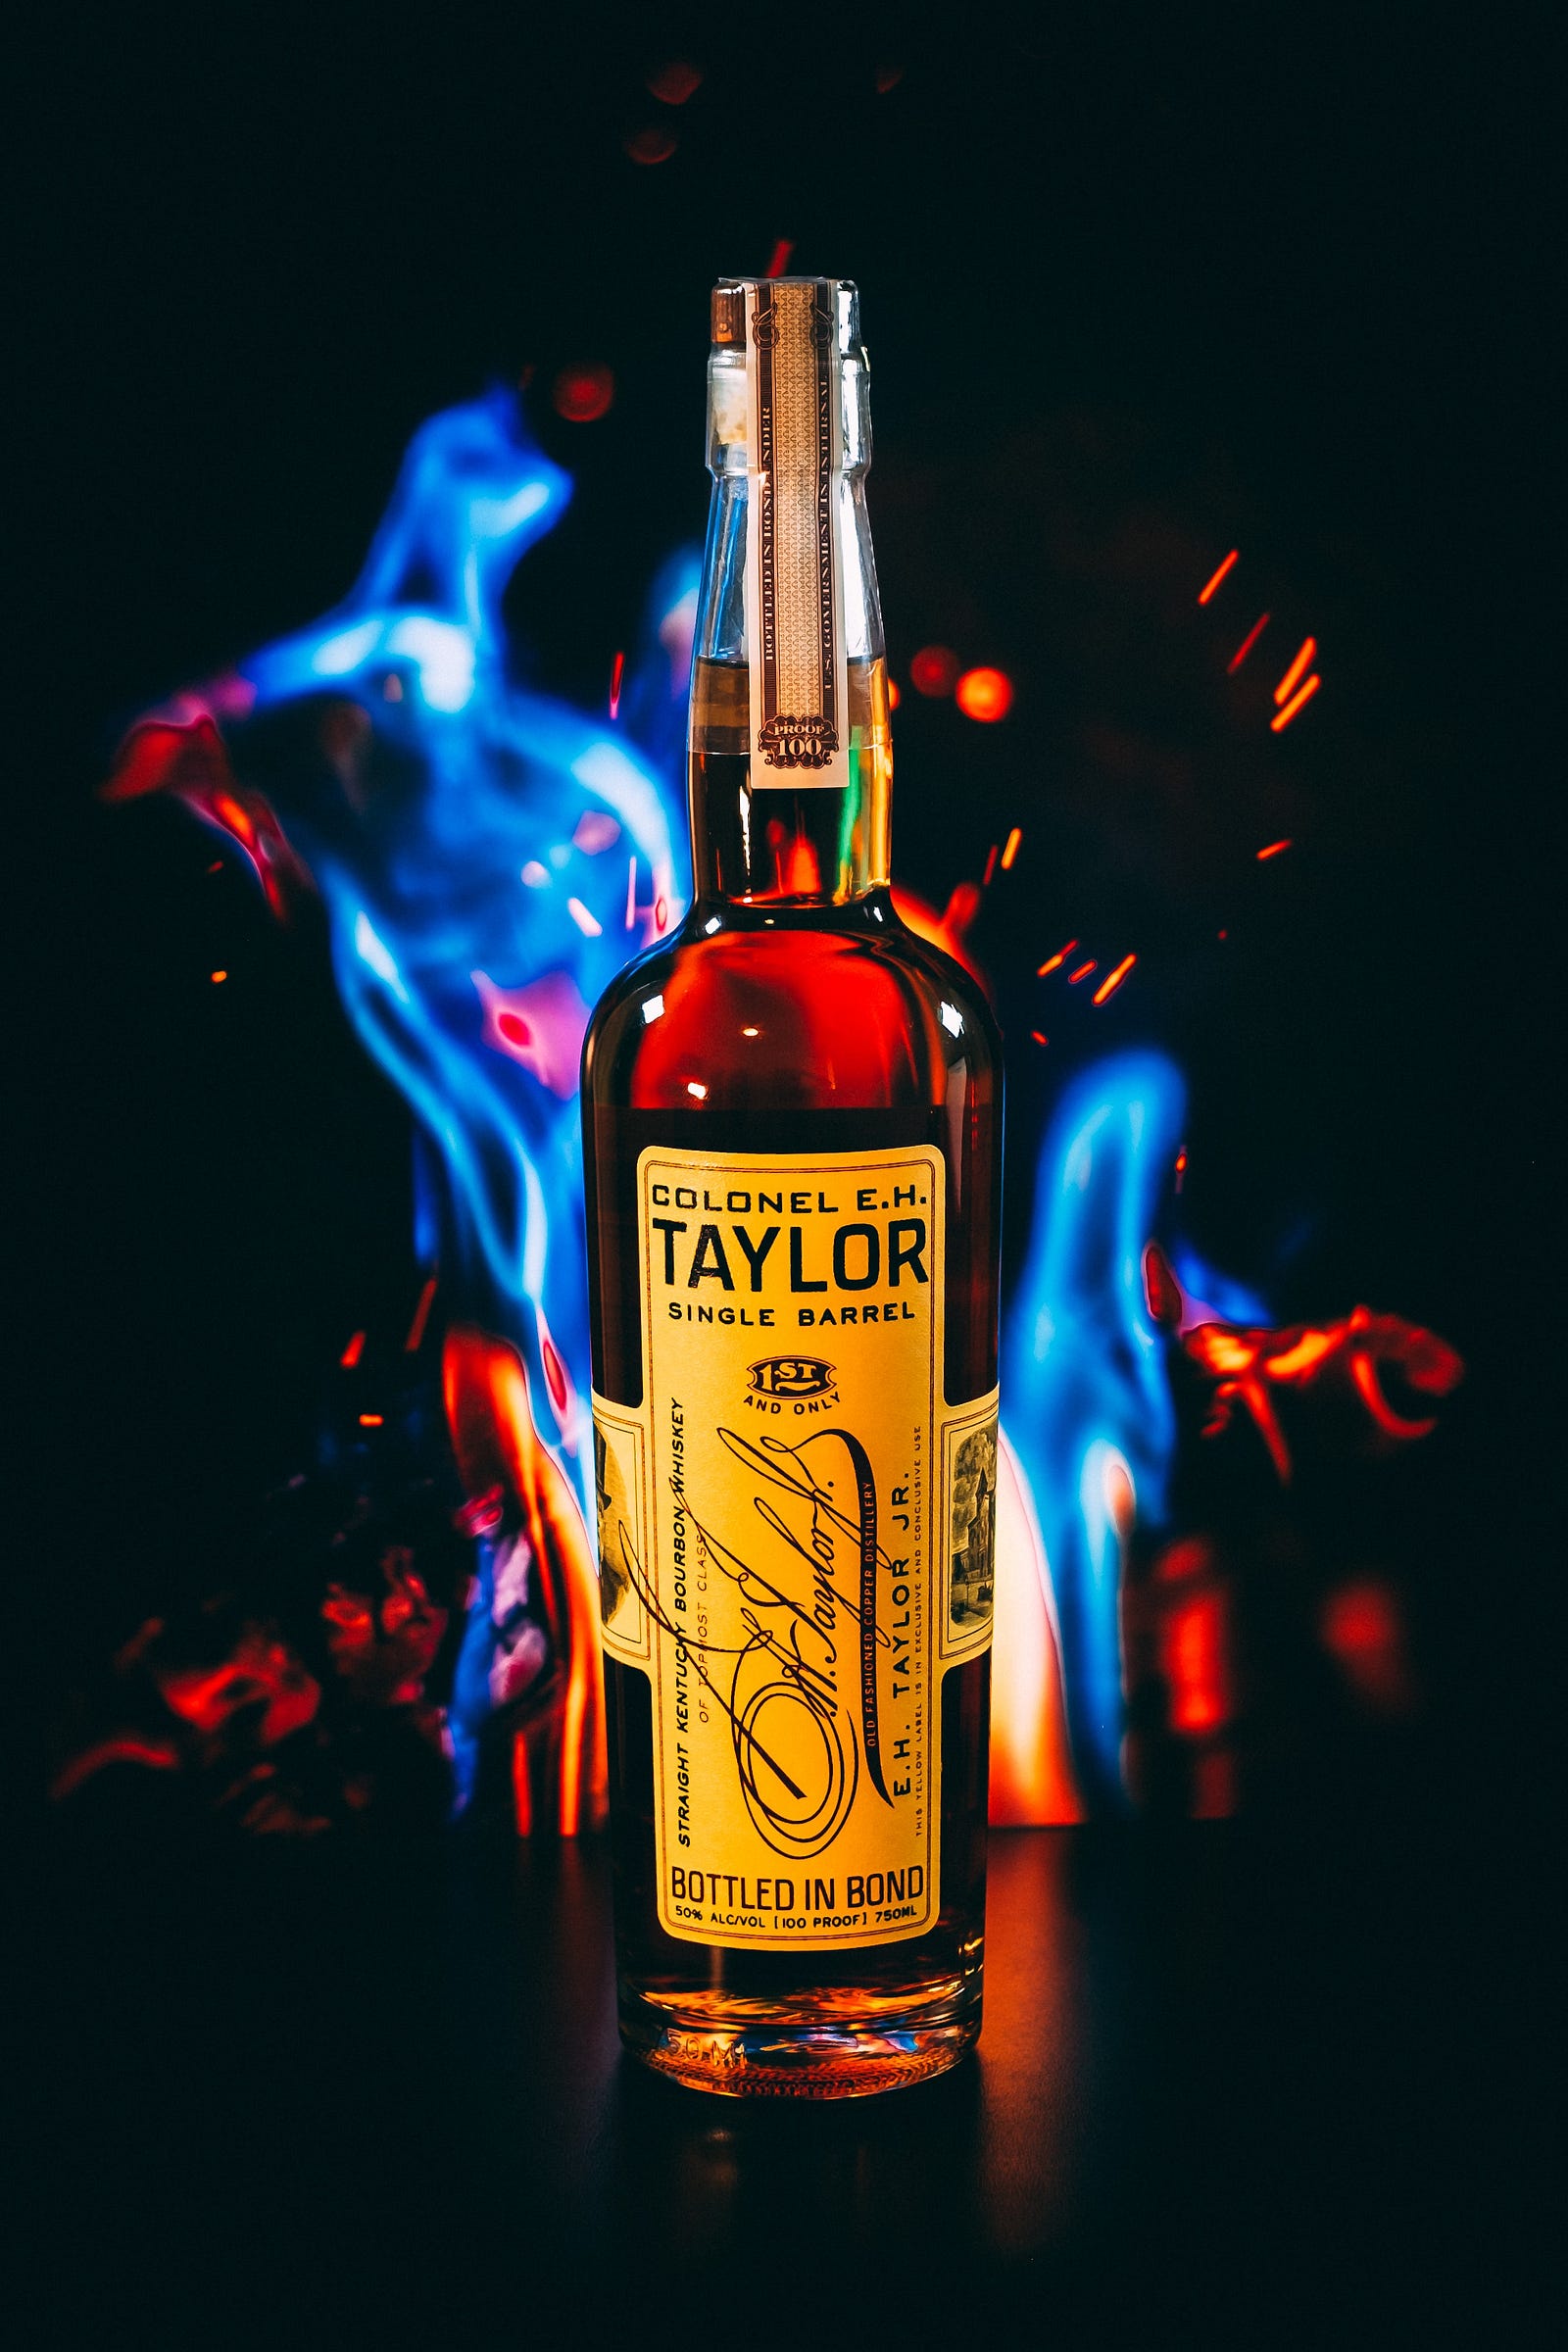 A bottle of alcholoh, labeled “Taylor” sits in the foreground, as flames rise behind it. Excessive alcohol intake can lead to elevated HDL cholesterol levels, possibly associated with an increased risk of dementia. I know that moderation is key.